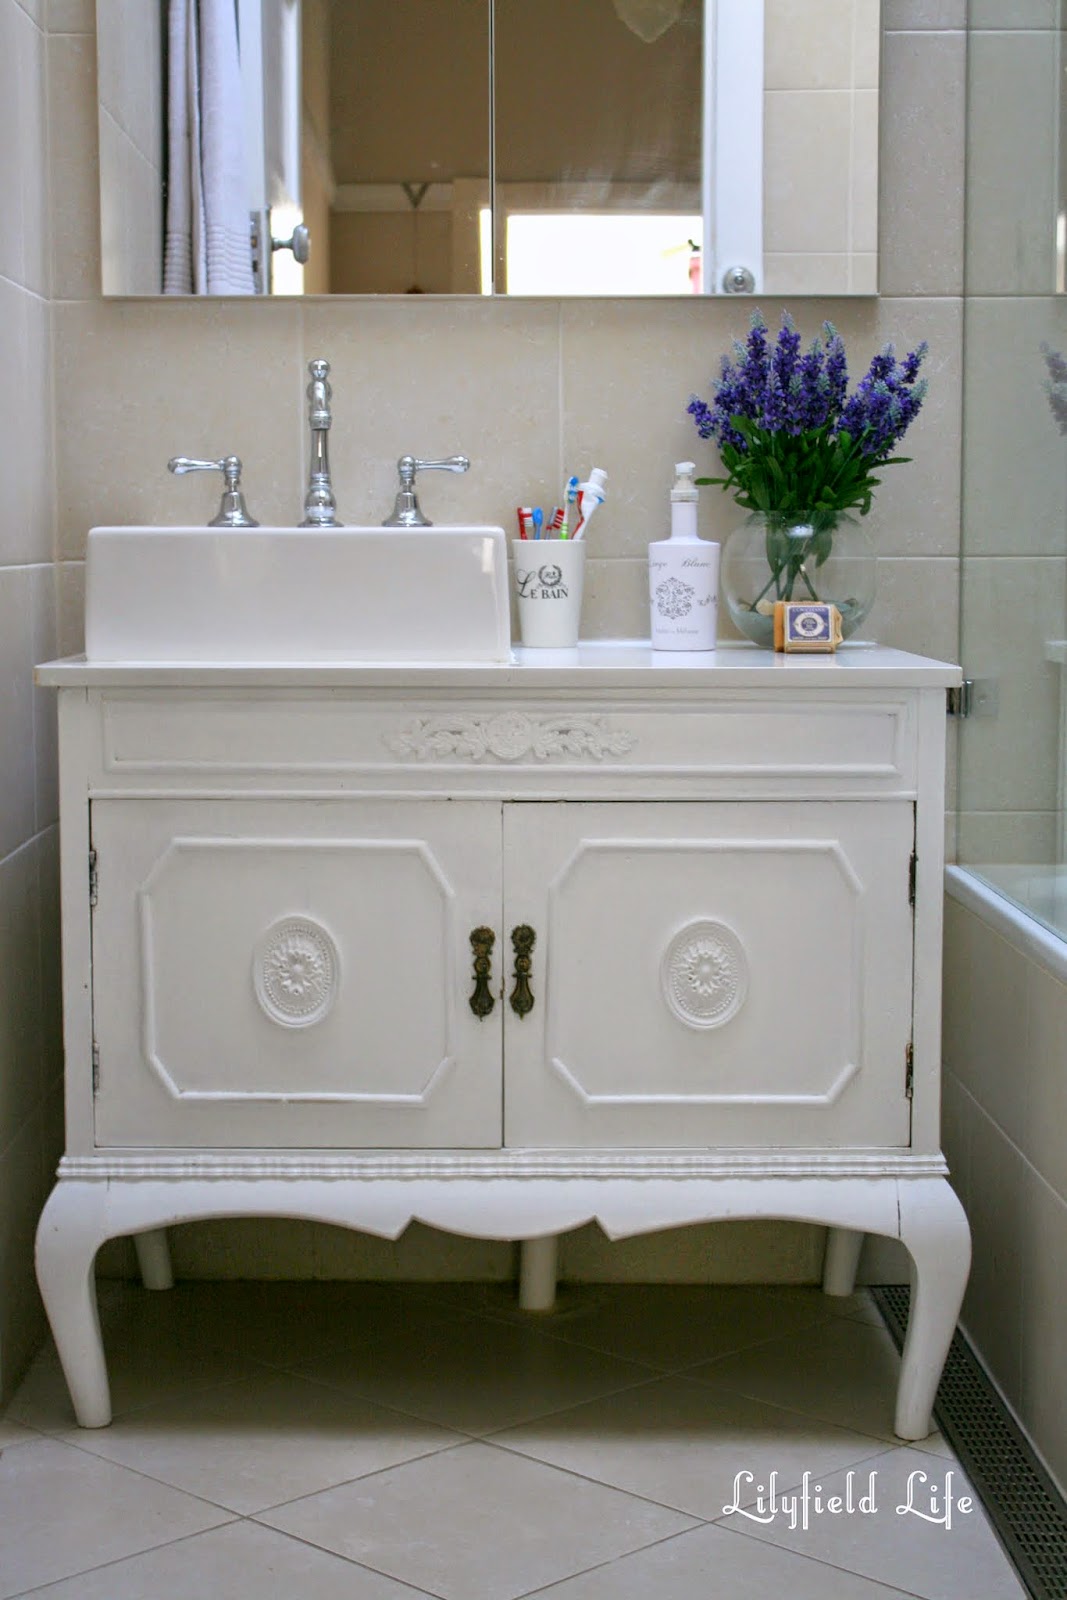 Lilyfield Life Vintage Cabinet Turned Bathroom Vanity And My Daughter At The Opera House